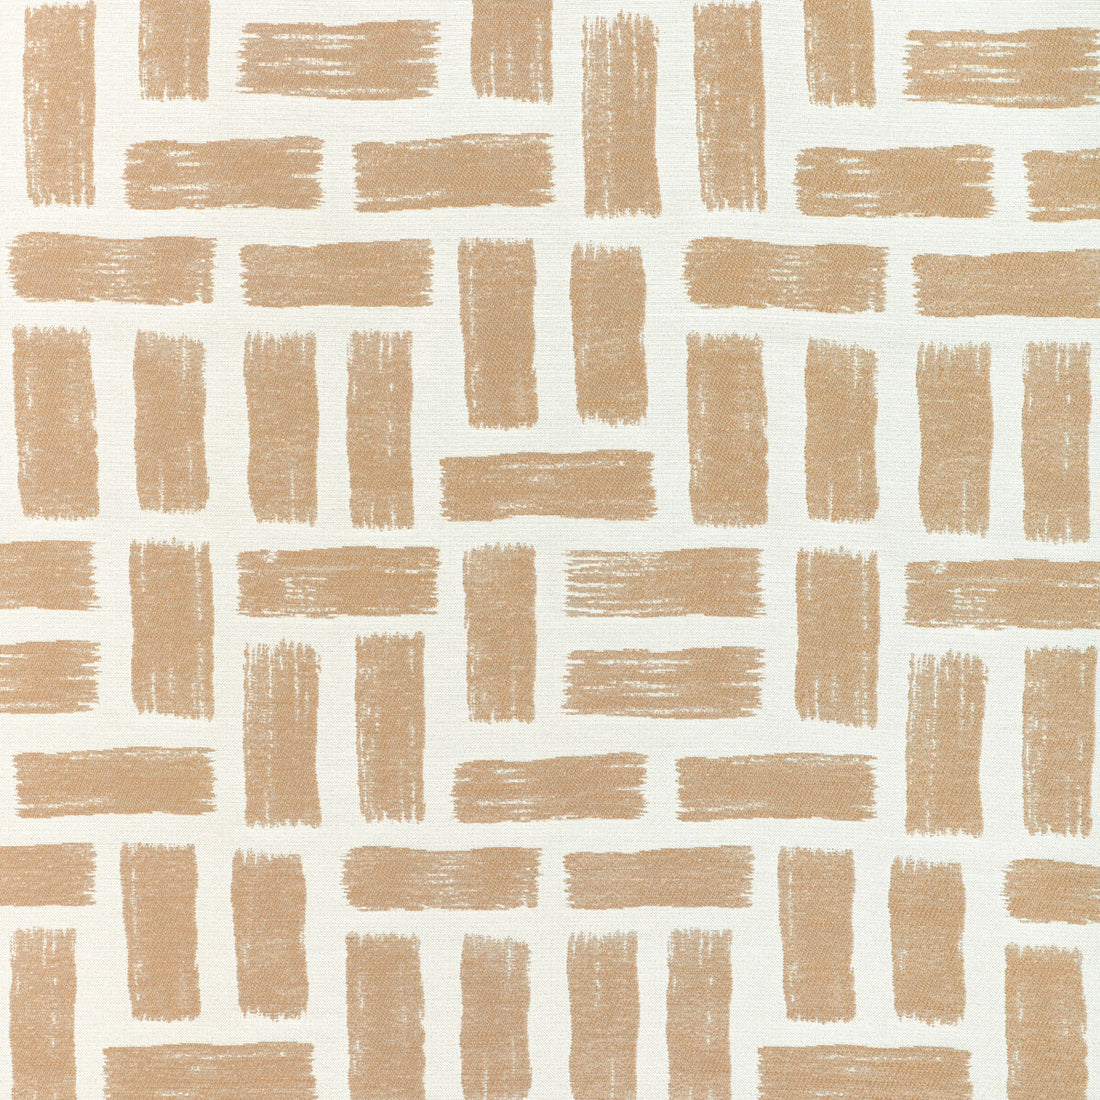 Brickwork fabric in amber color - pattern 37055.16.0 - by Kravet Design in the Thom Filicia Latitude collection